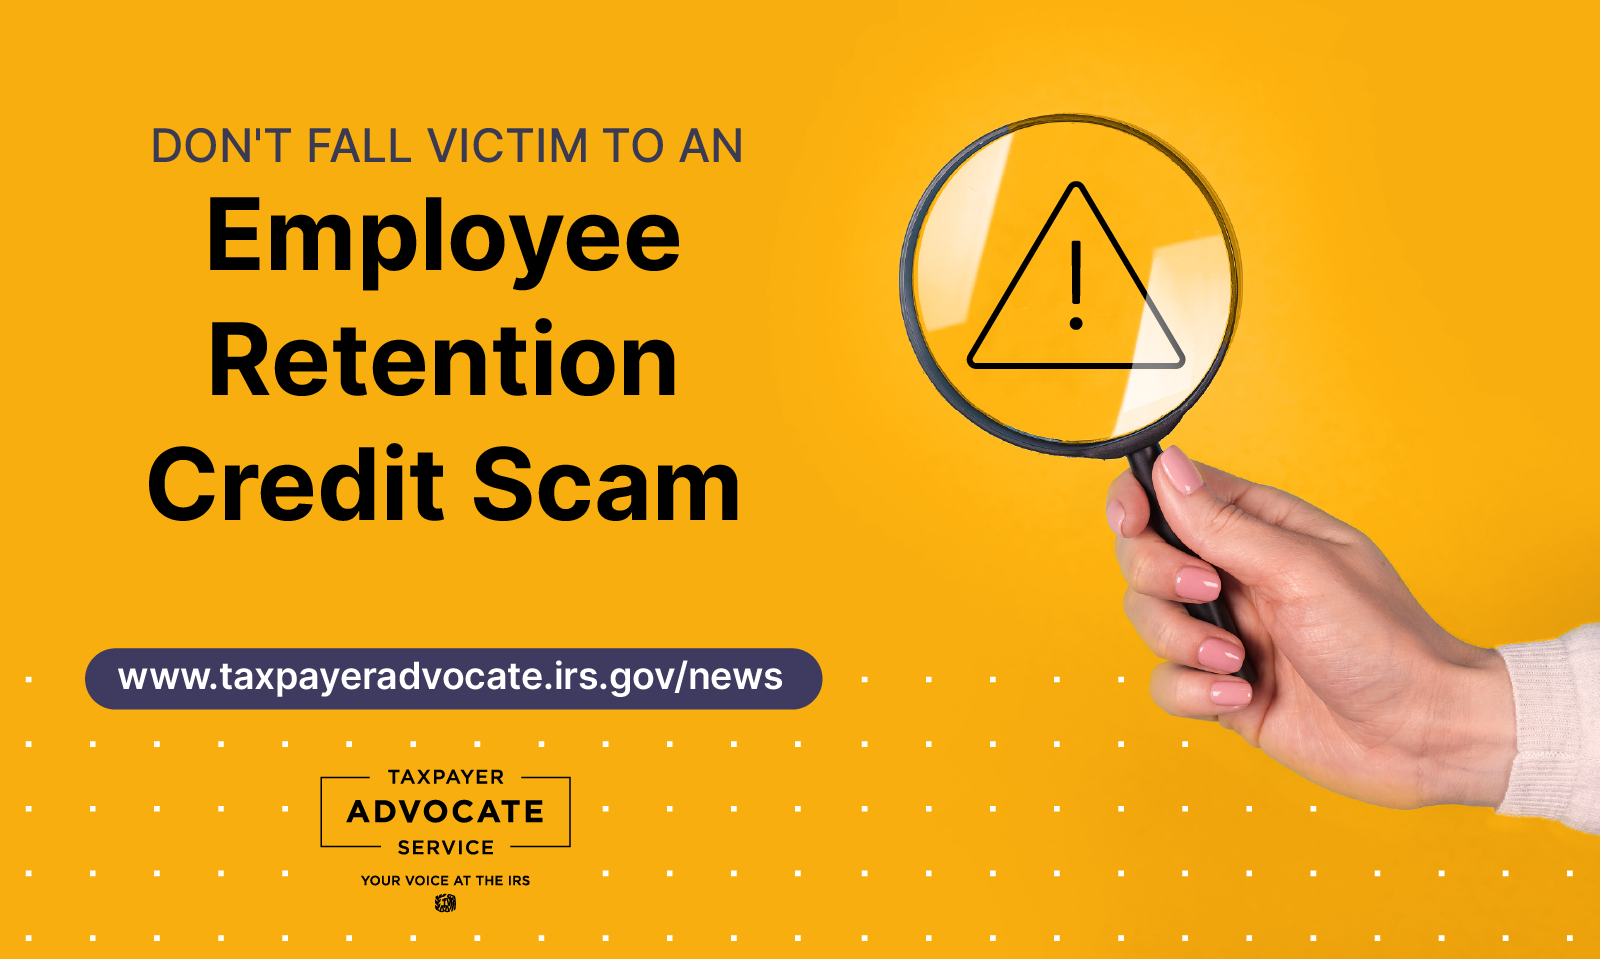 Mustard yellow background. Don't fall victim to an Employee Retention scam. www.taxpayeradvocate.irs.gov/news; Taxpayer Advocate Service logo; hand holding a magnifying glass viewing a danger sign (exclamation mark inside triangle)